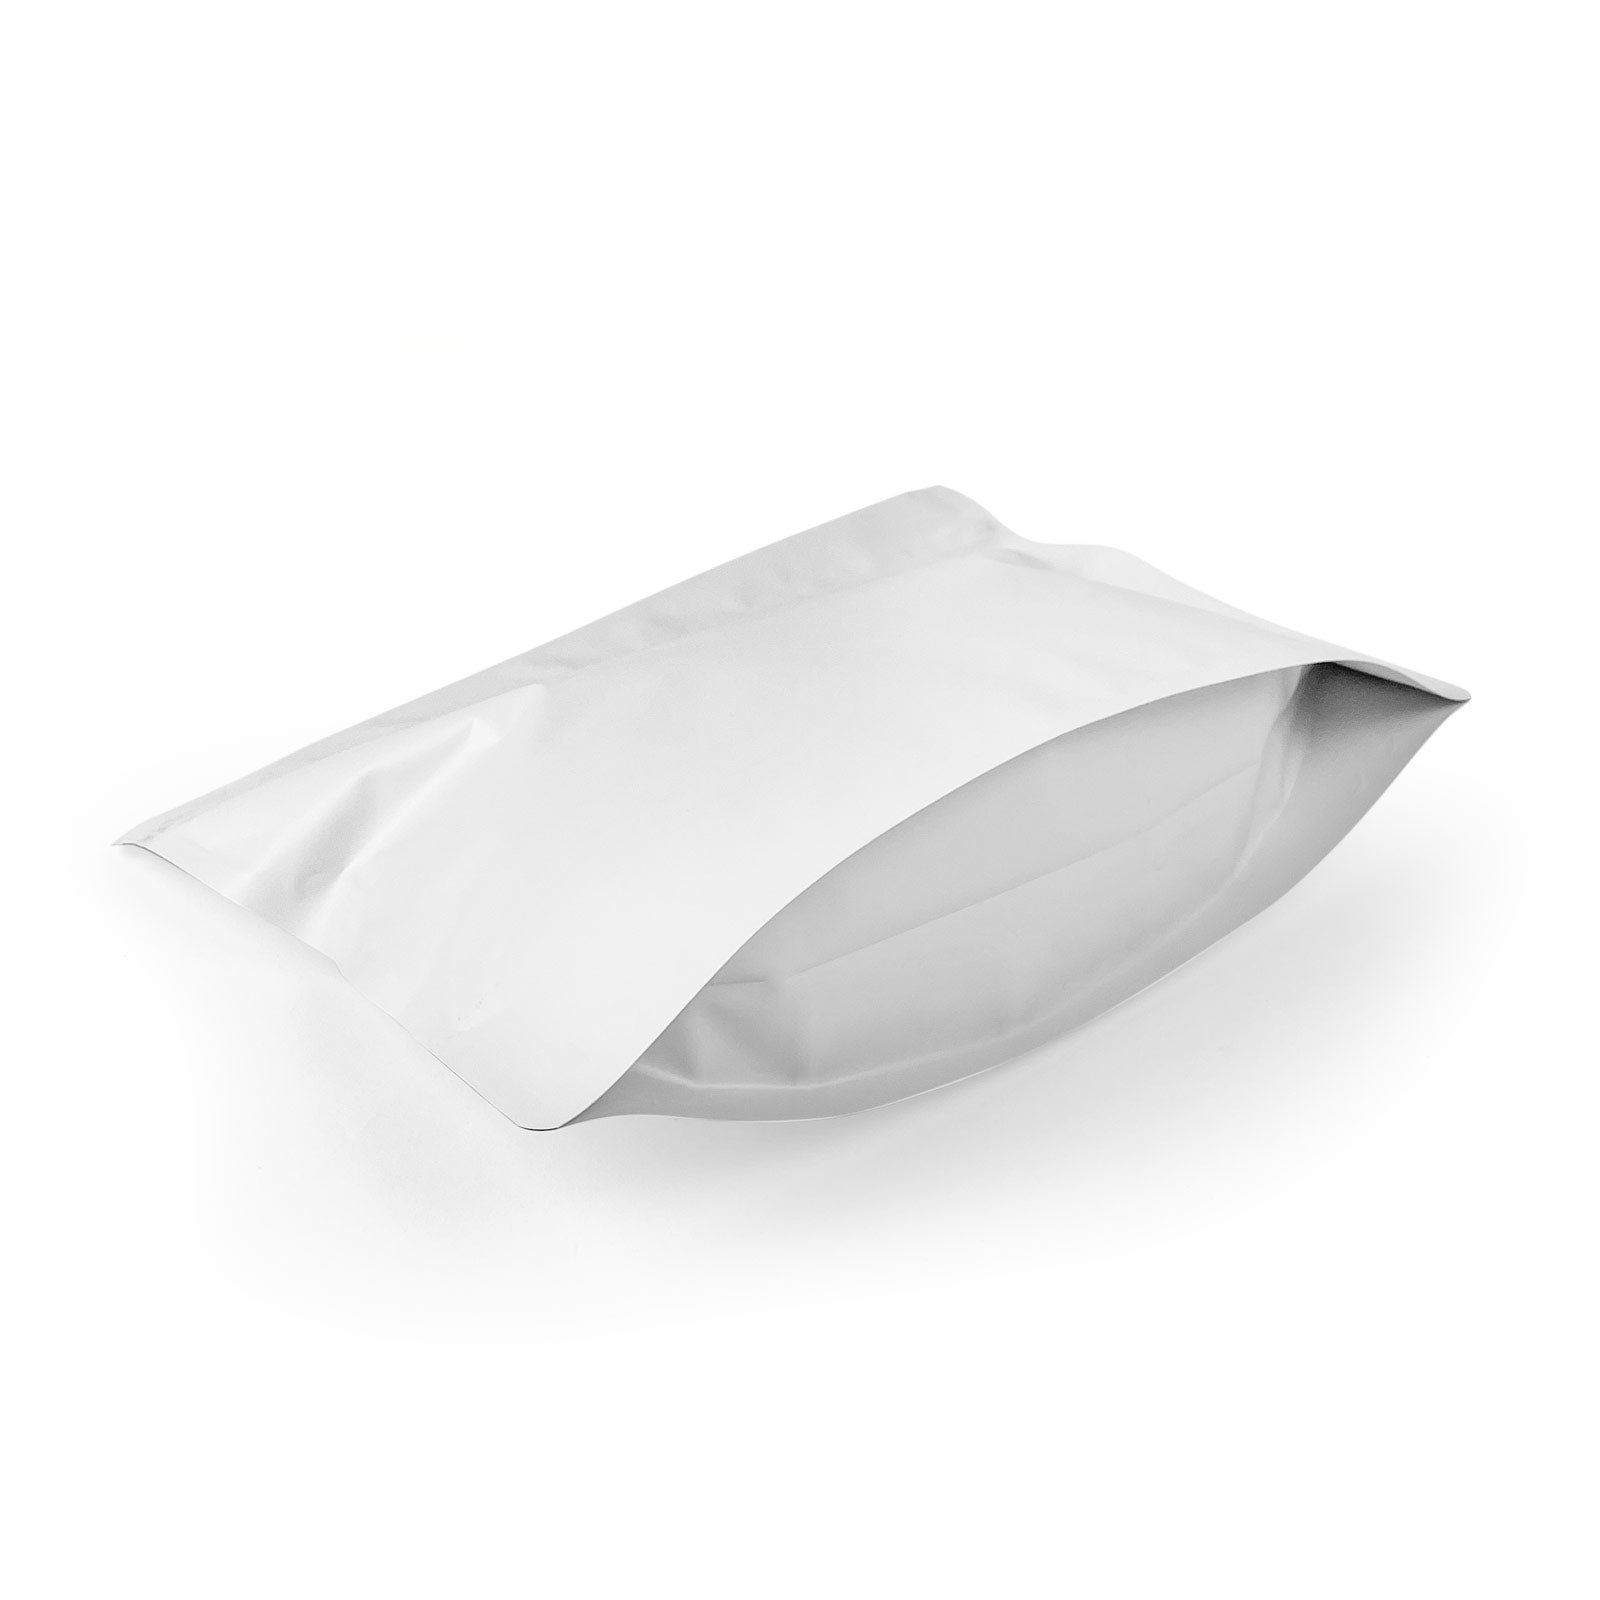 12"x9" Large Child Resistant Exit Bags All White - 50 Count